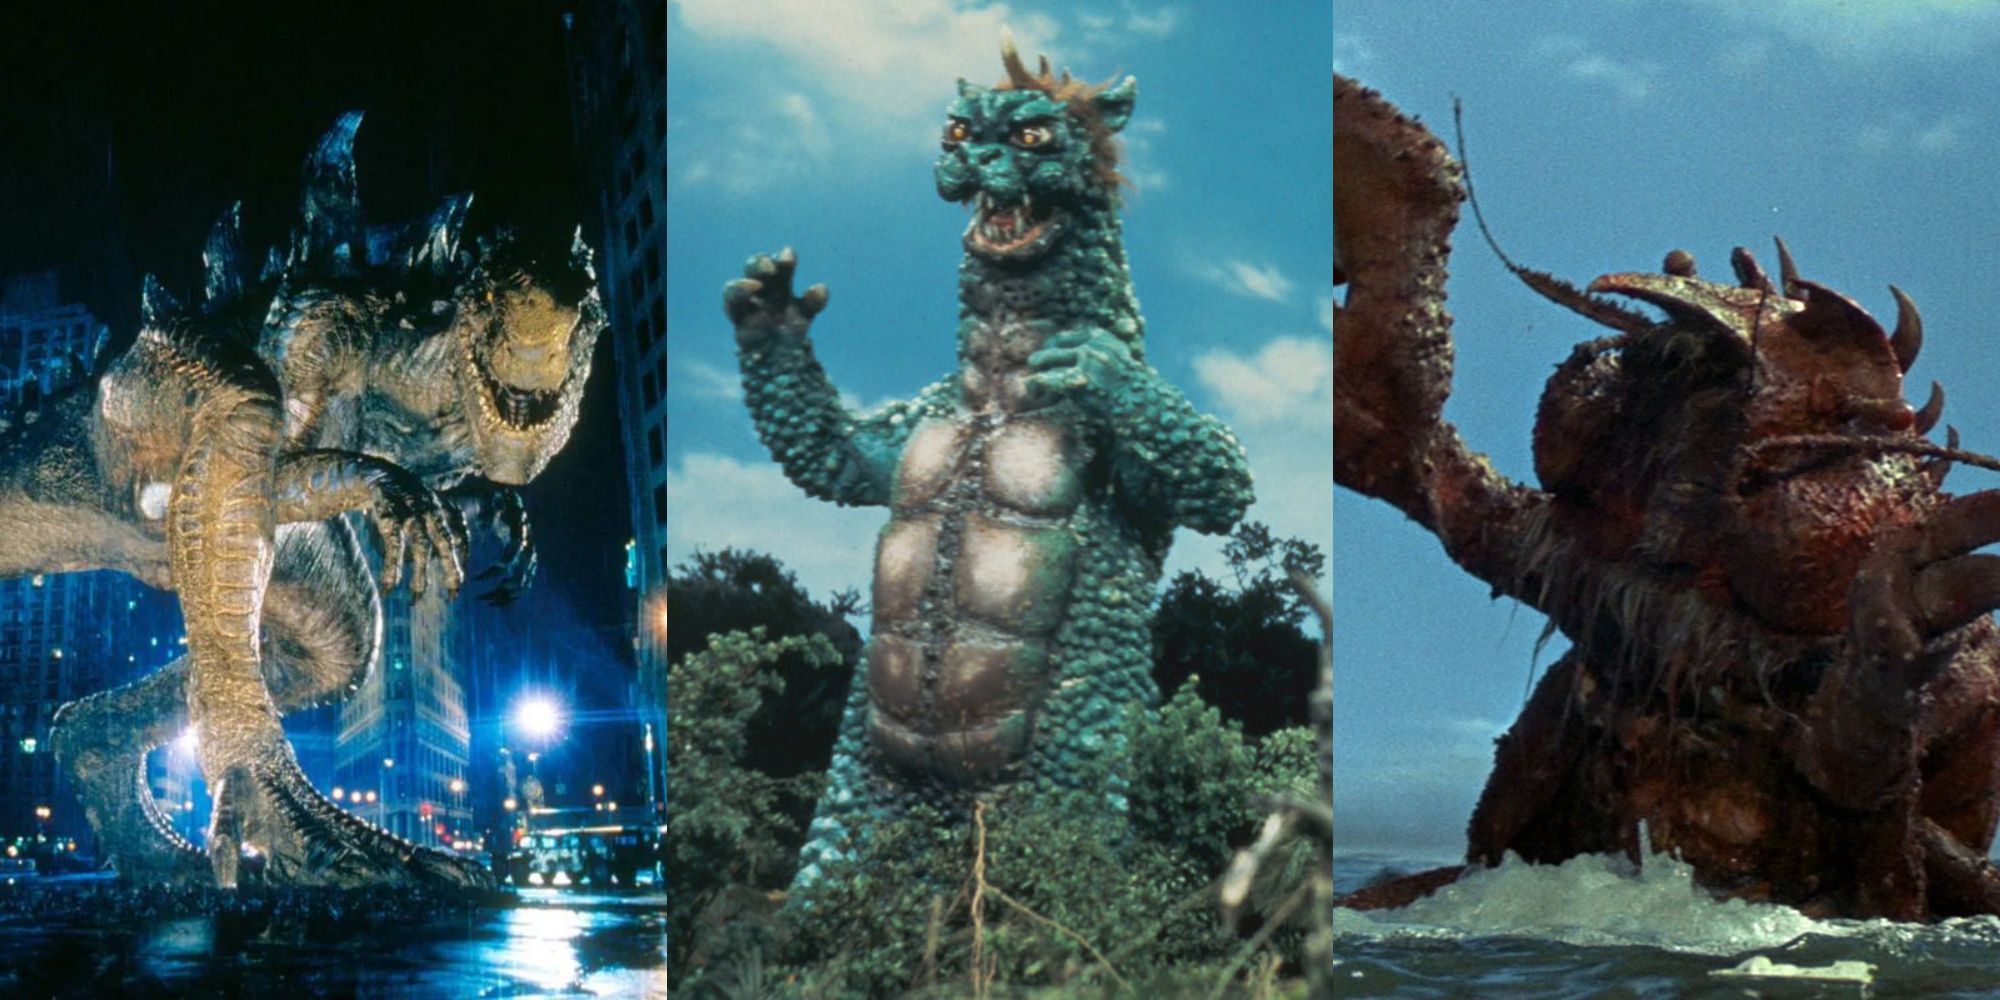 A collage of some of the weakest monsters in the Godzilla Franchise: Zilla, Gabara and Ebirah.